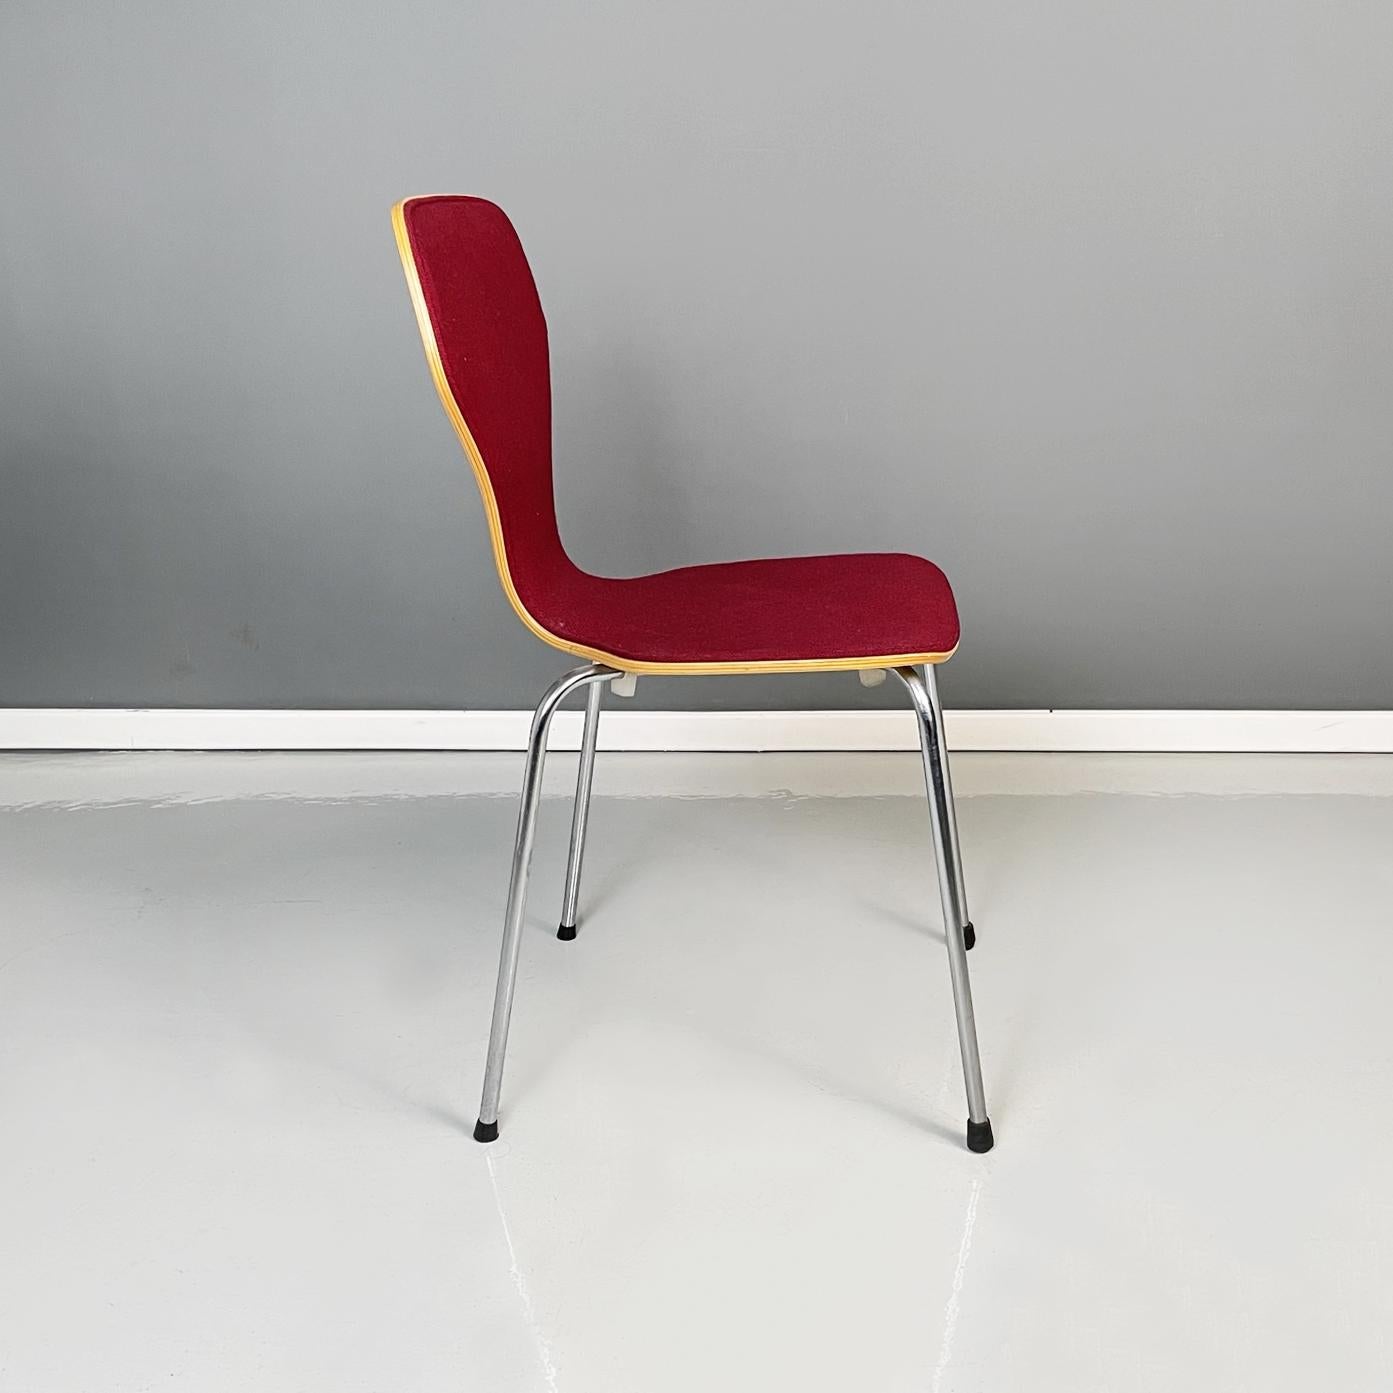 Late 20th Century Danish Modern Wooden, Bordeaux Fabric and Steel Chair by Phoenix, 1970s For Sale